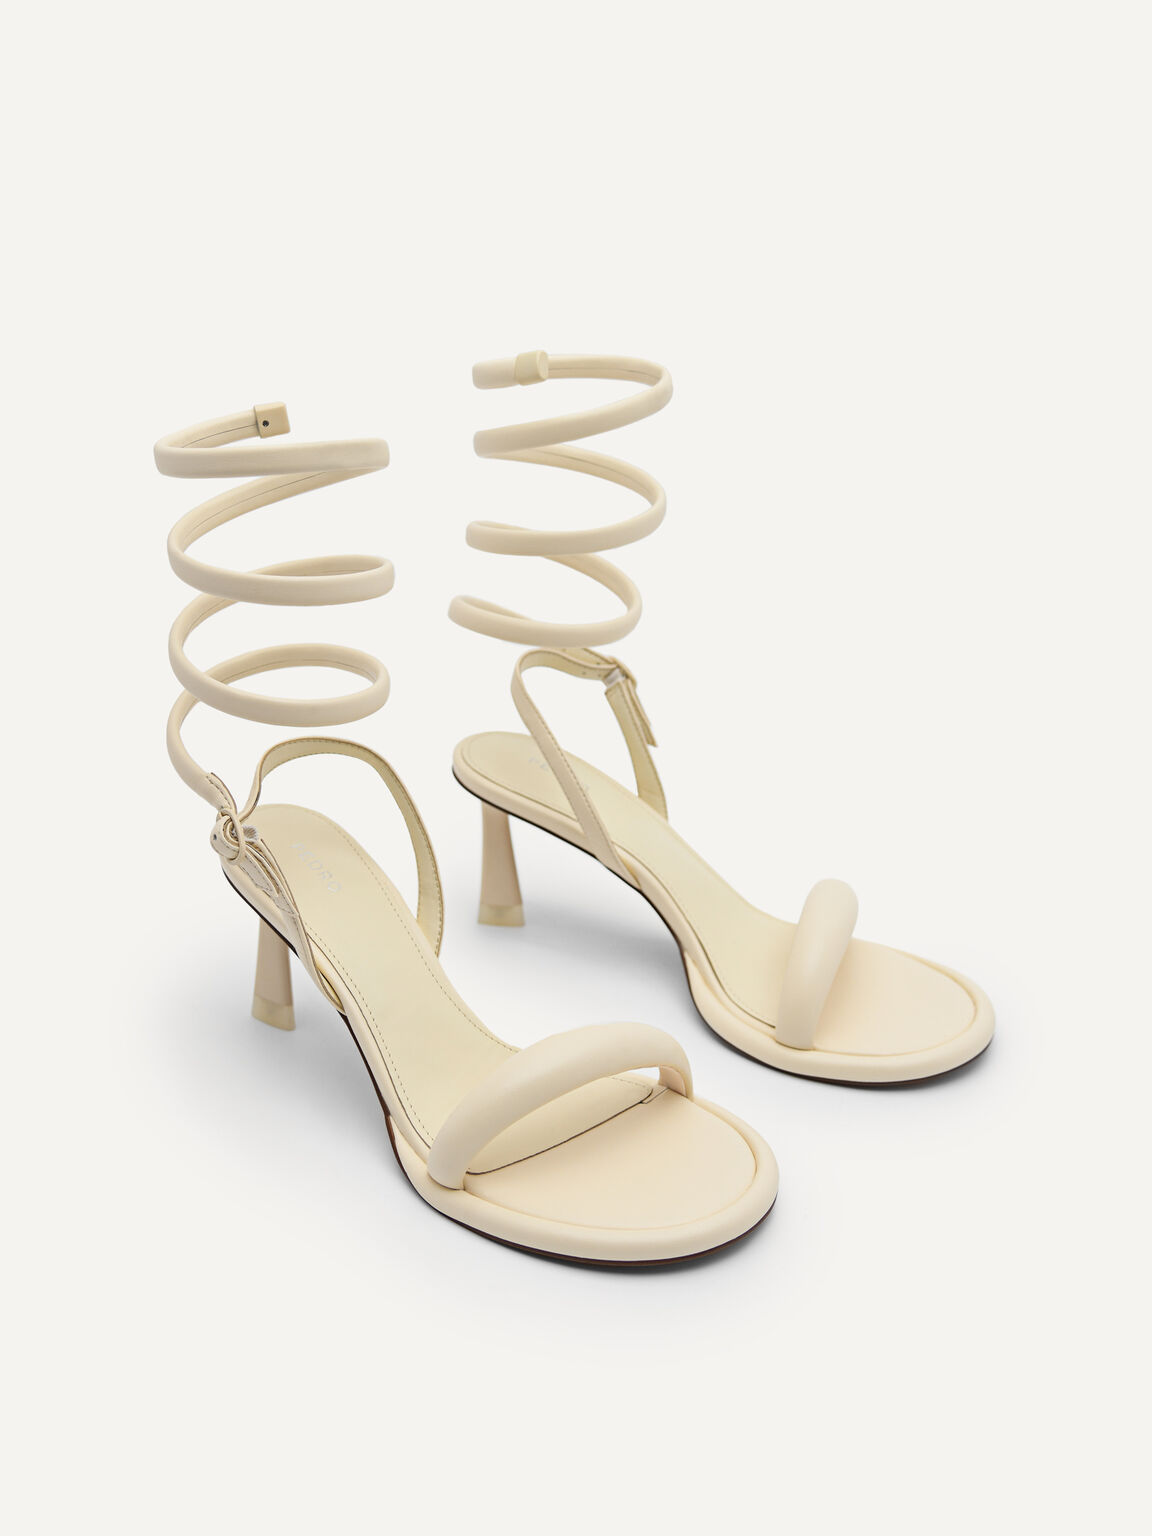 Terrazo Heels with Detachable Coil Strap, Beige